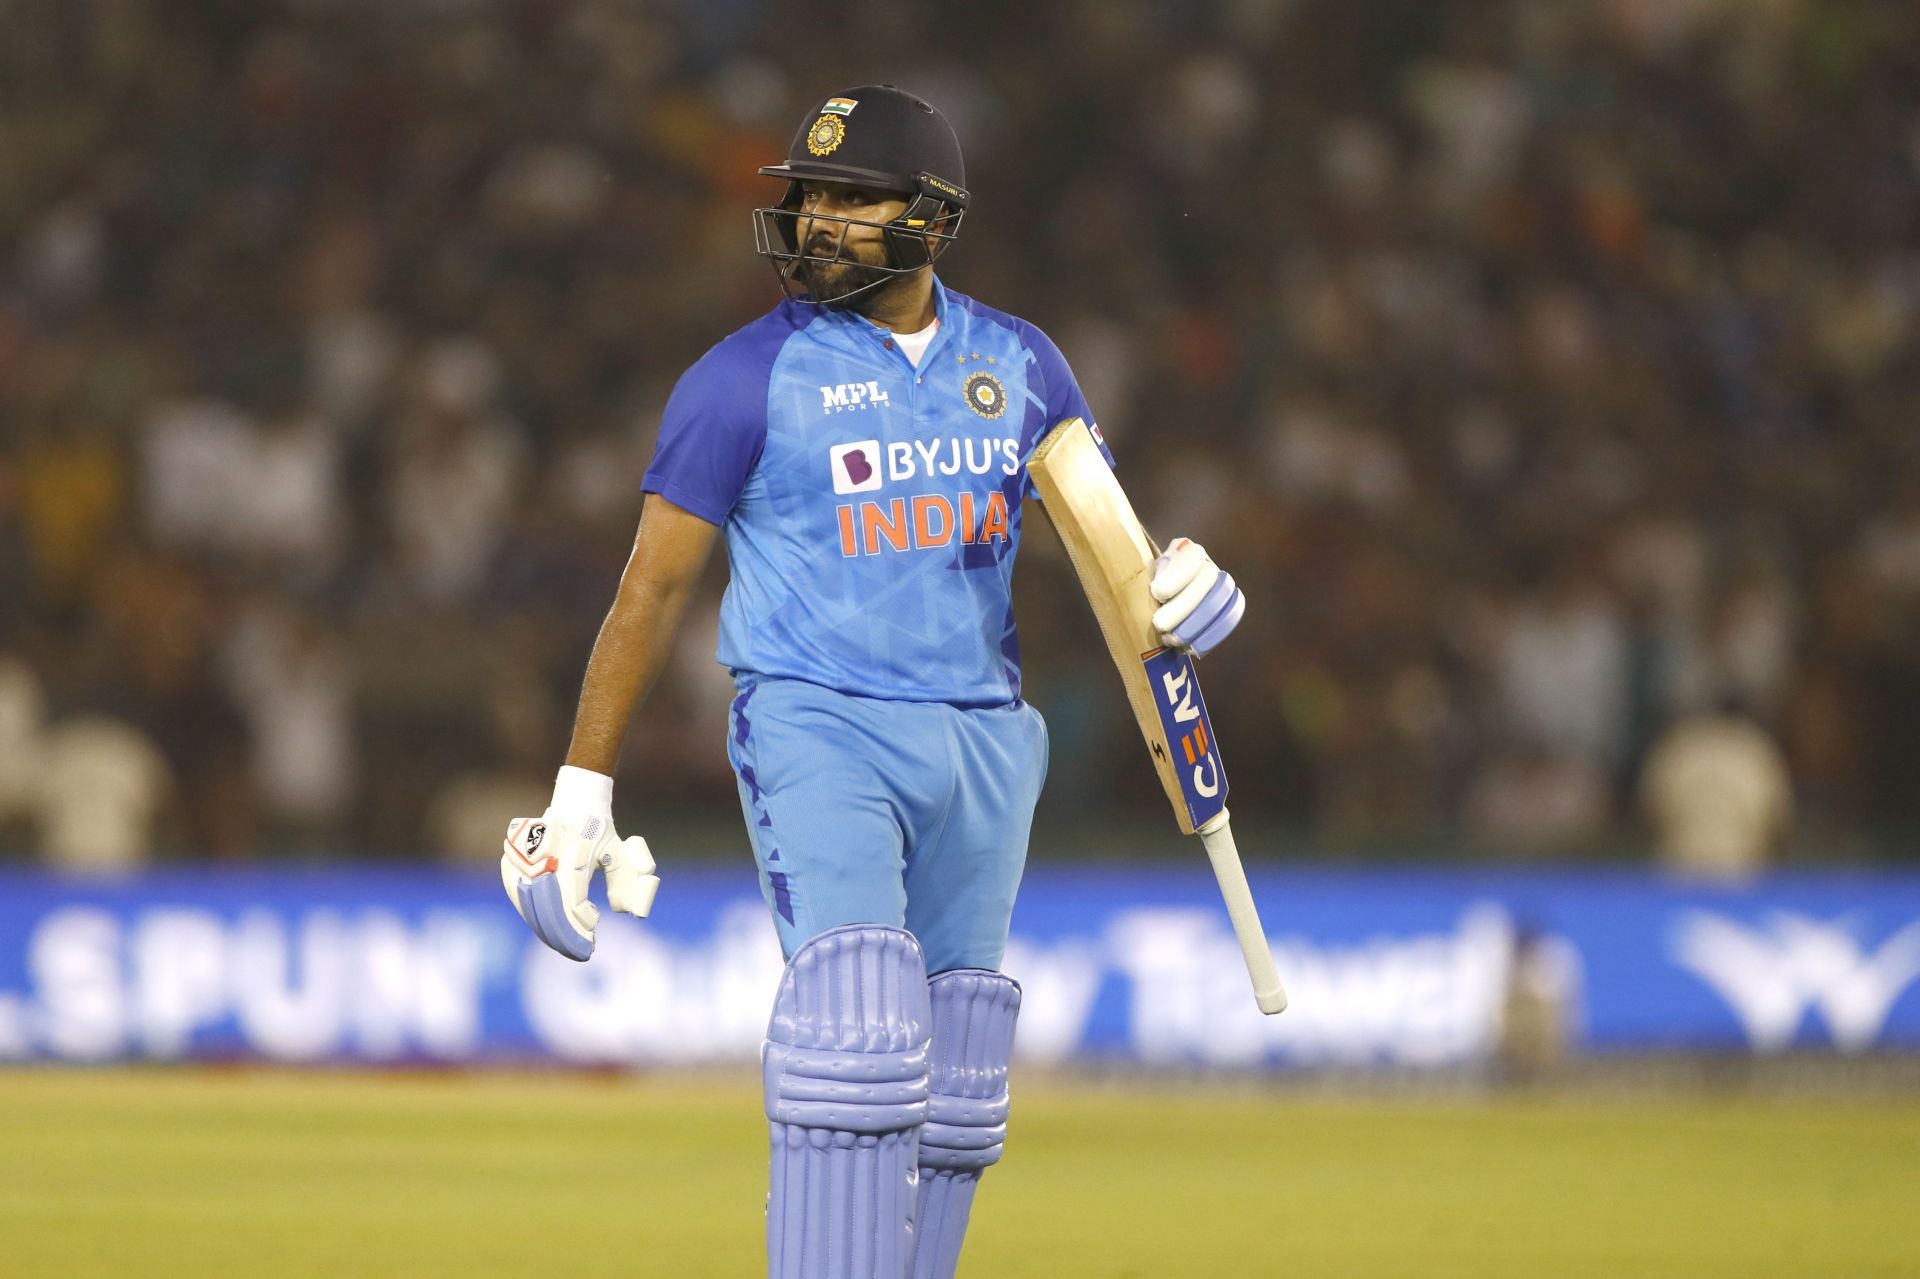 Team India skipper Rohit Sharma got out for a duck in his last T20I innings. (Image: Getty)